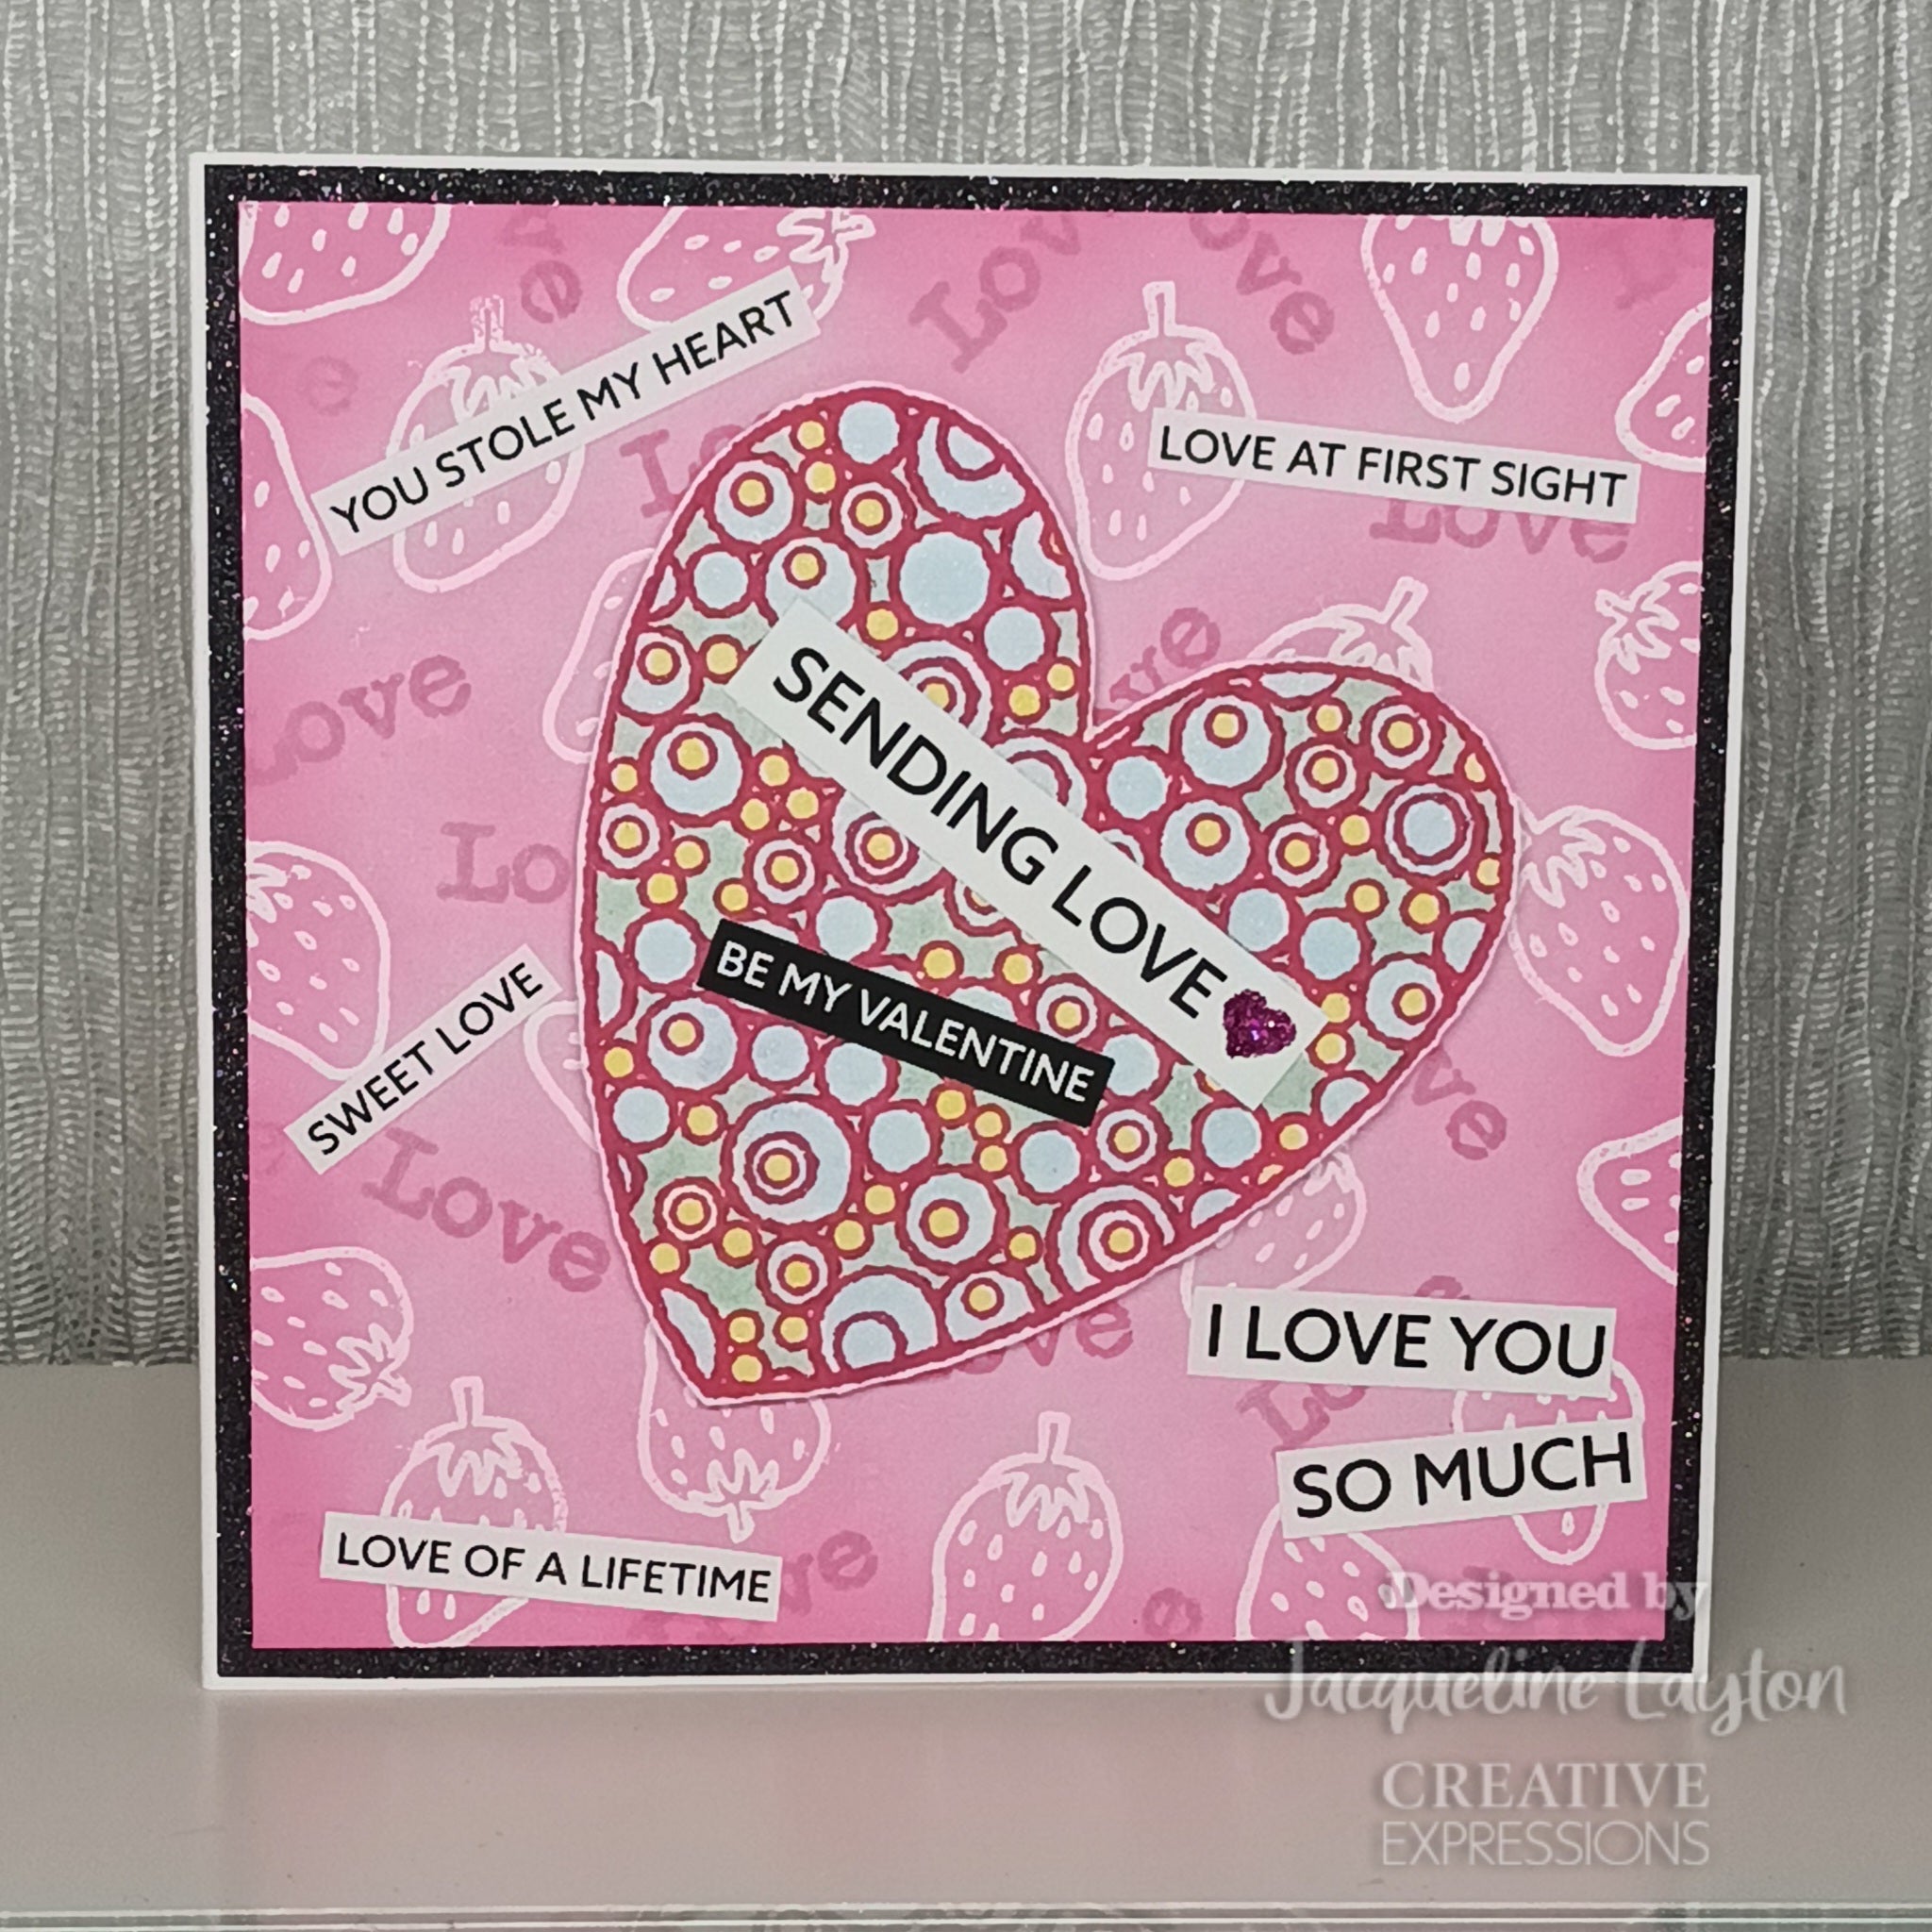 Creative Expressions Wordies Sentiment Sheets - Be My Valentine 4 Pk 6 in x 8 in